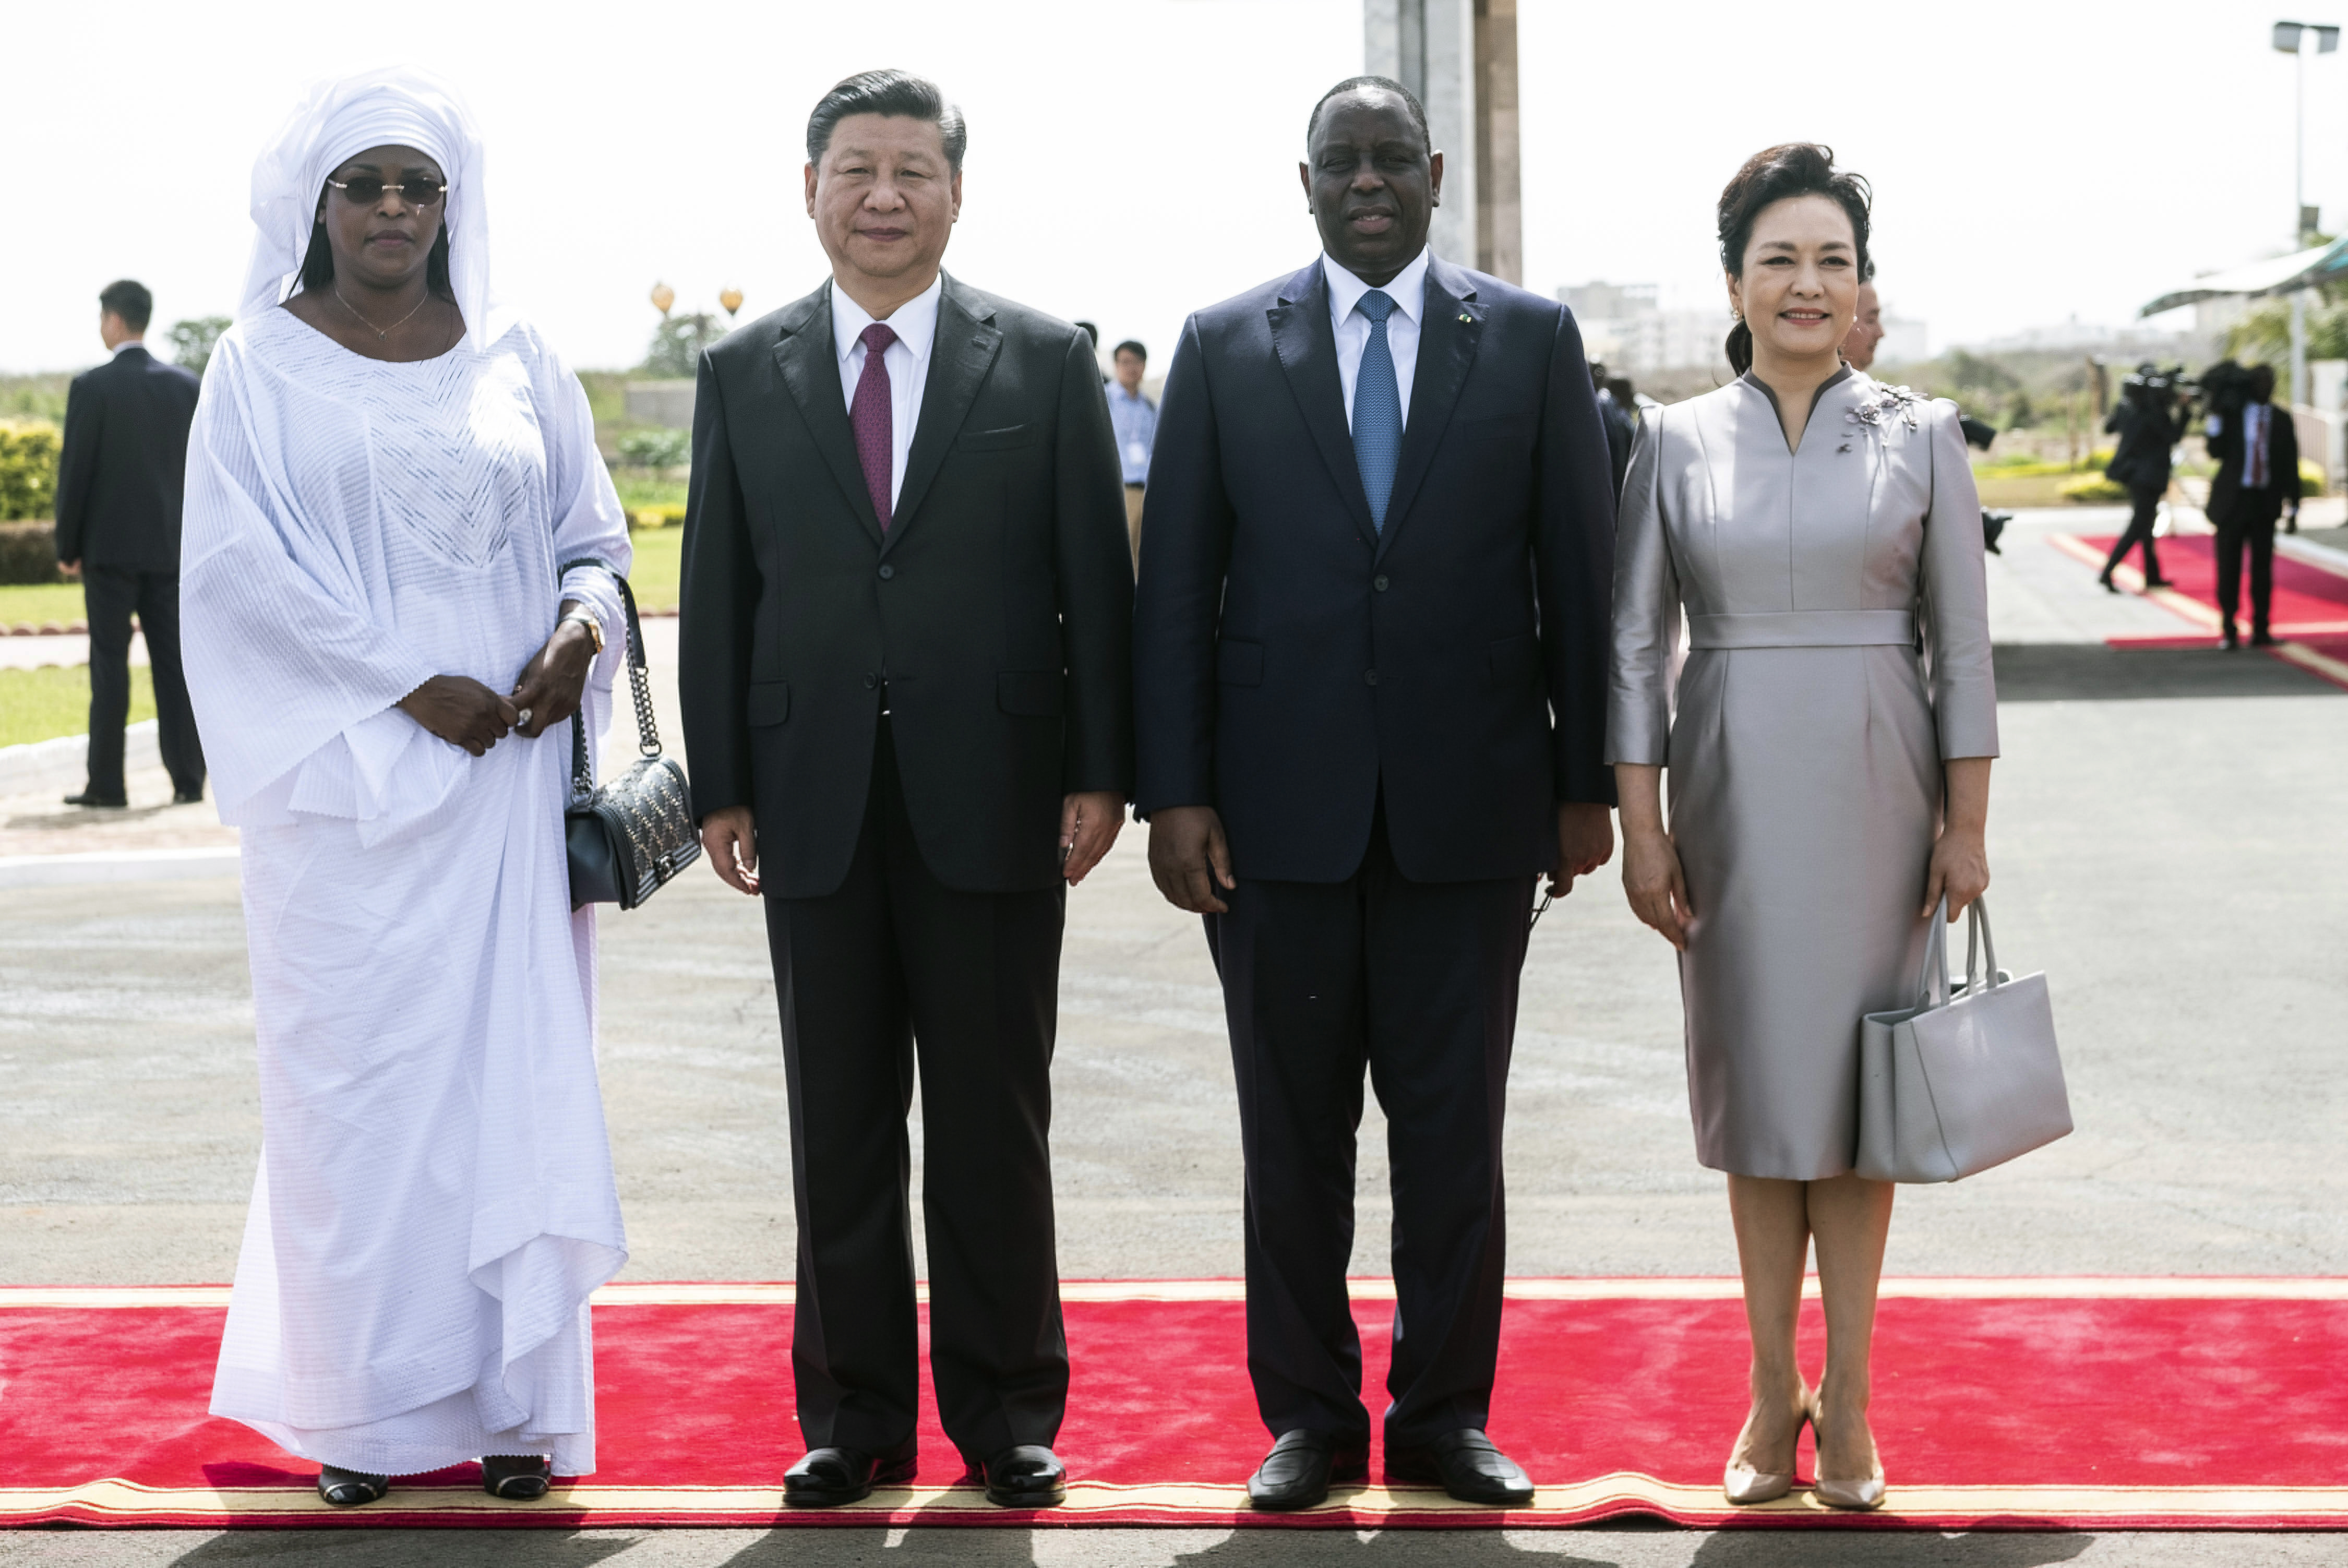 Senegal's President wife Marieme Faye Sall, left, Chinese President Xi Jinping, second, left, President of the Republic of Senegal, Macky Sall, Third left, first lady of china Peng Liyuan pose for a photograph during a state visit in Dakar, Senegal, 21 July 2018. Chinese President Xi Jinping will be visiting Senegal, Rwanda and South Africa where he will attend the BRICS Summit. (Xaume Olleros/AP Photo)